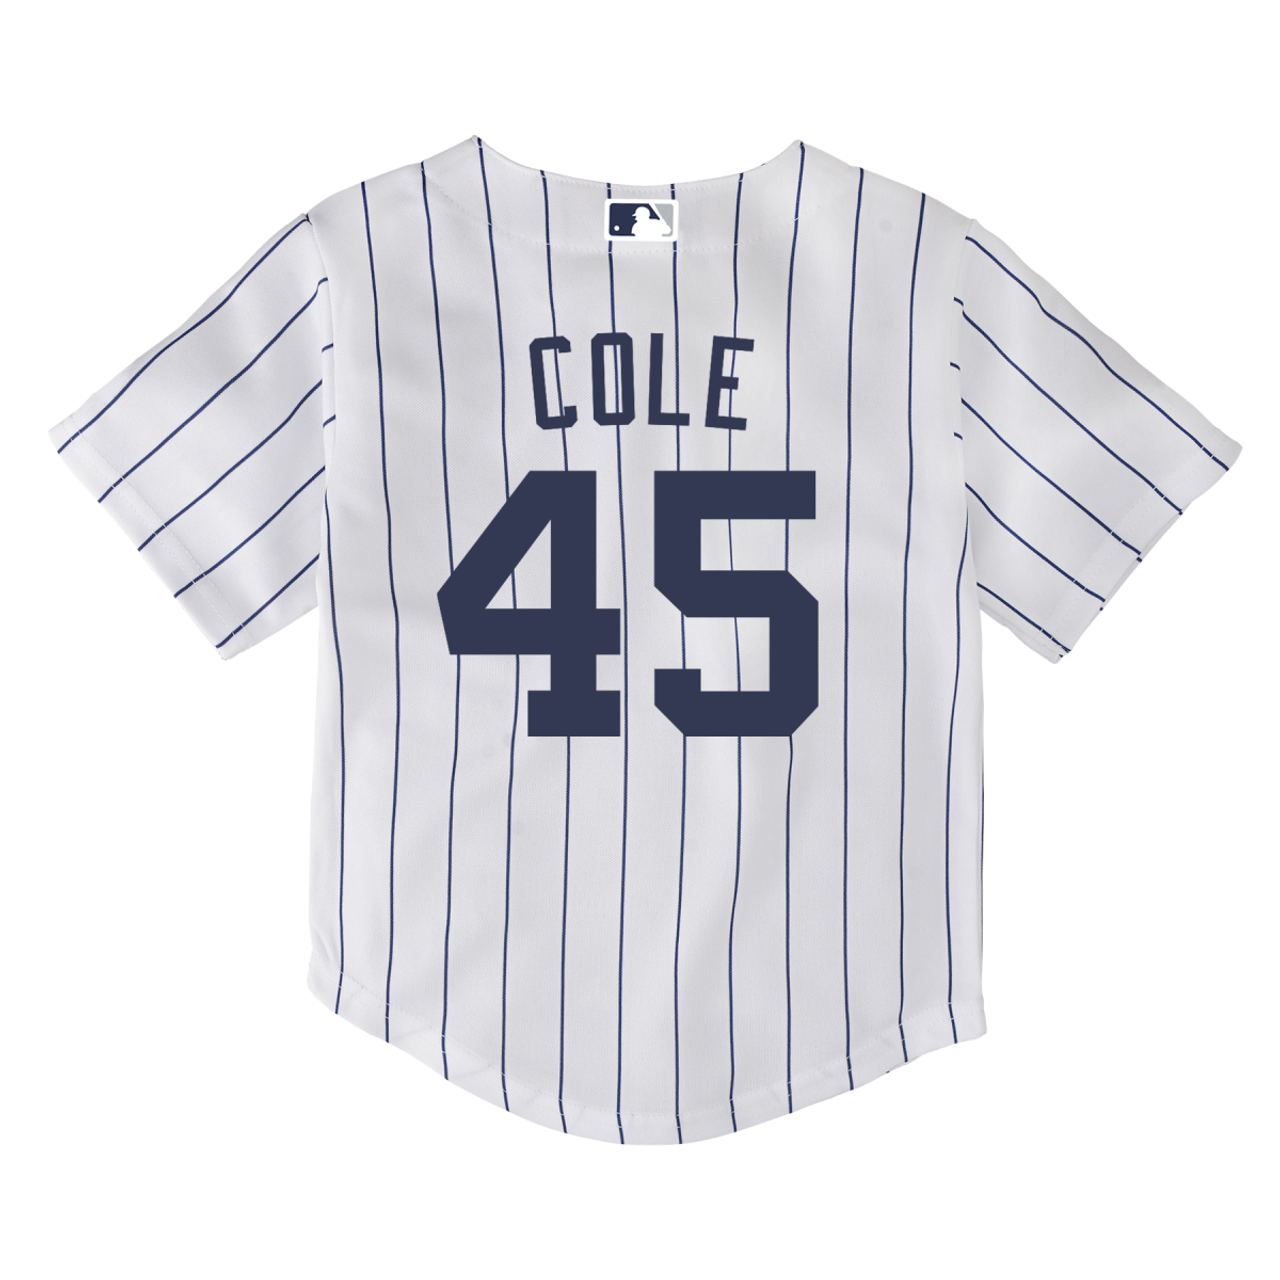 Gerrit Cole Toddler Jersey - NY Yankees Replica Toddler Home